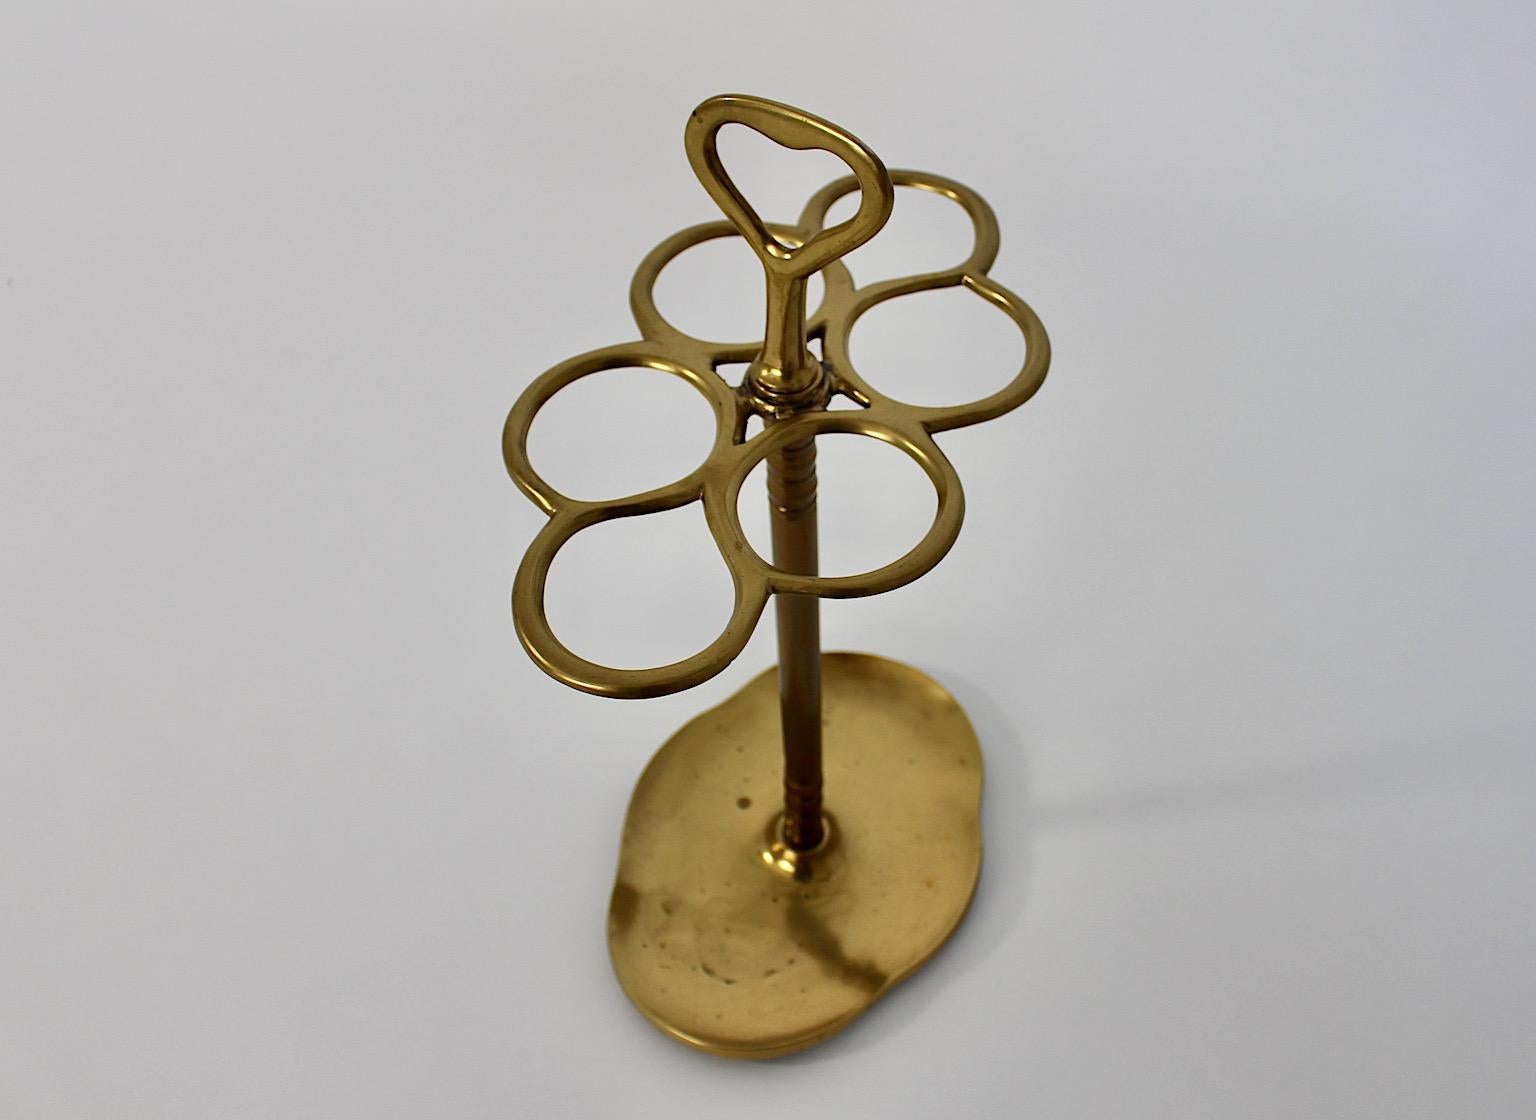 Italian Hollywood Regency Style Vintage Brass Umbrella Stand Cane Holder 1970s Italy For Sale